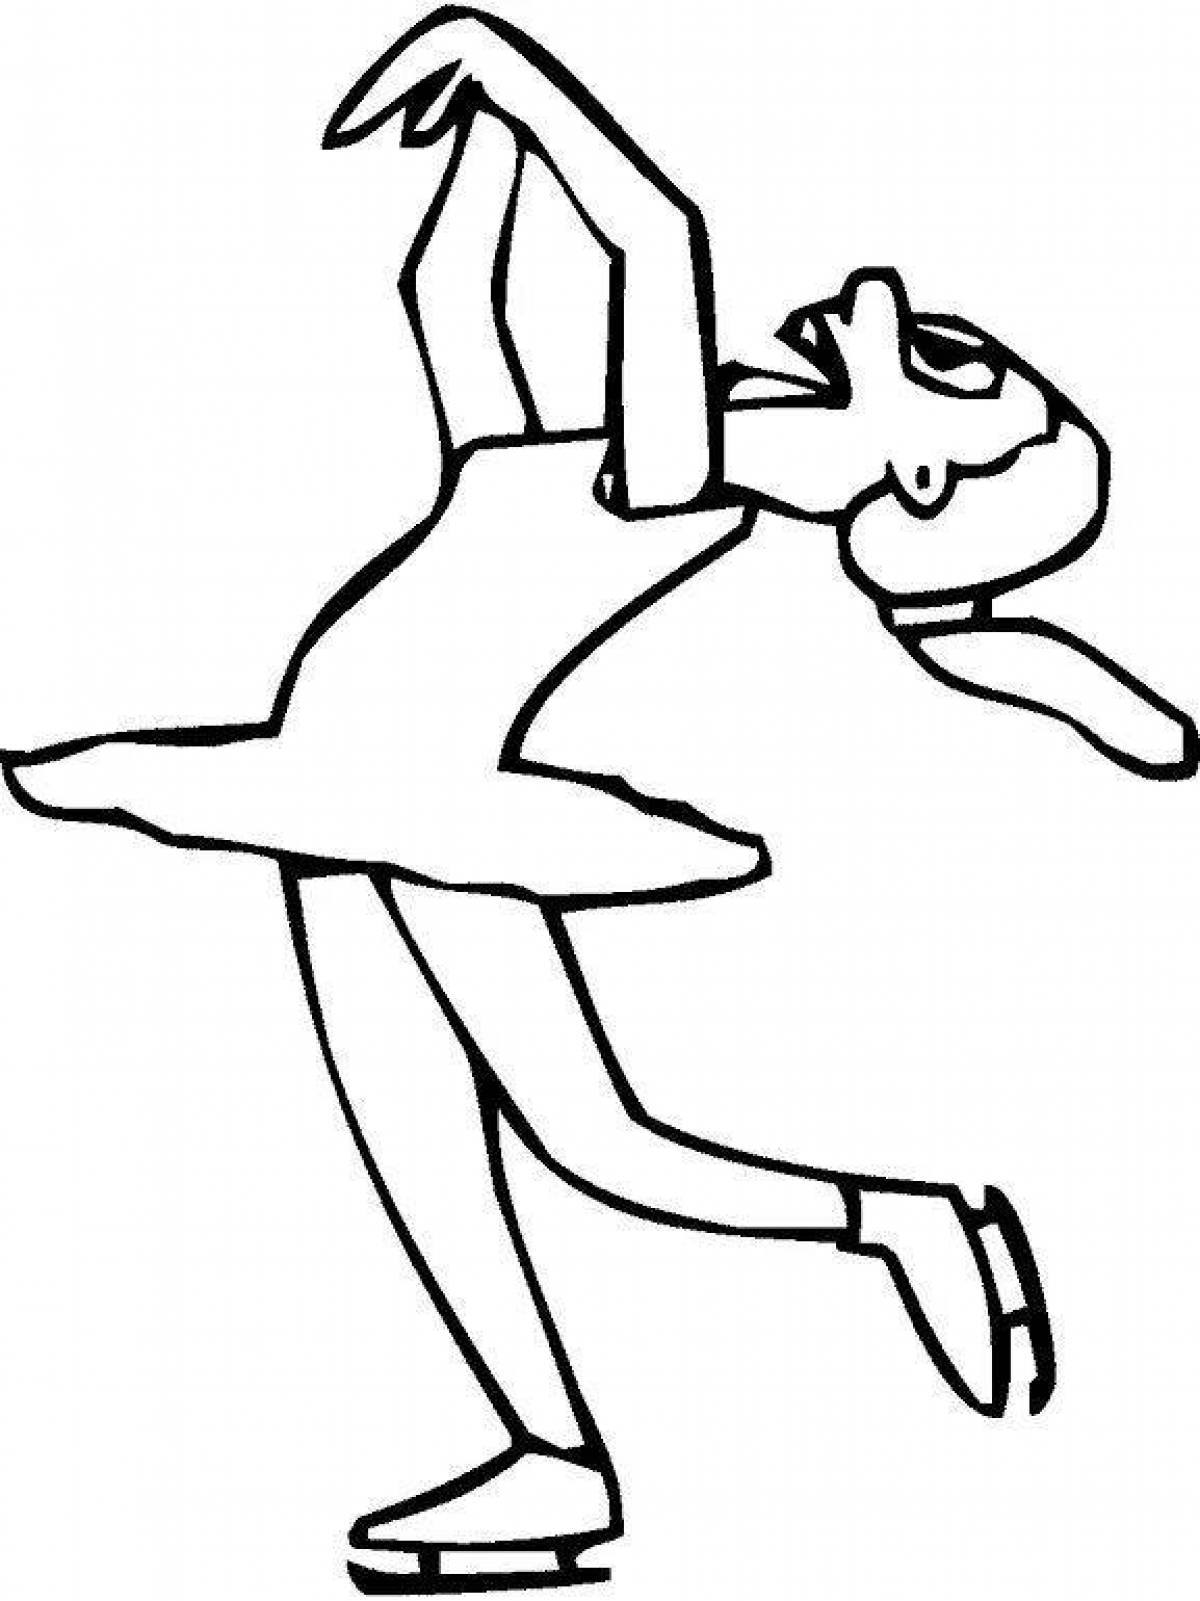 Great figure skater coloring book for kids